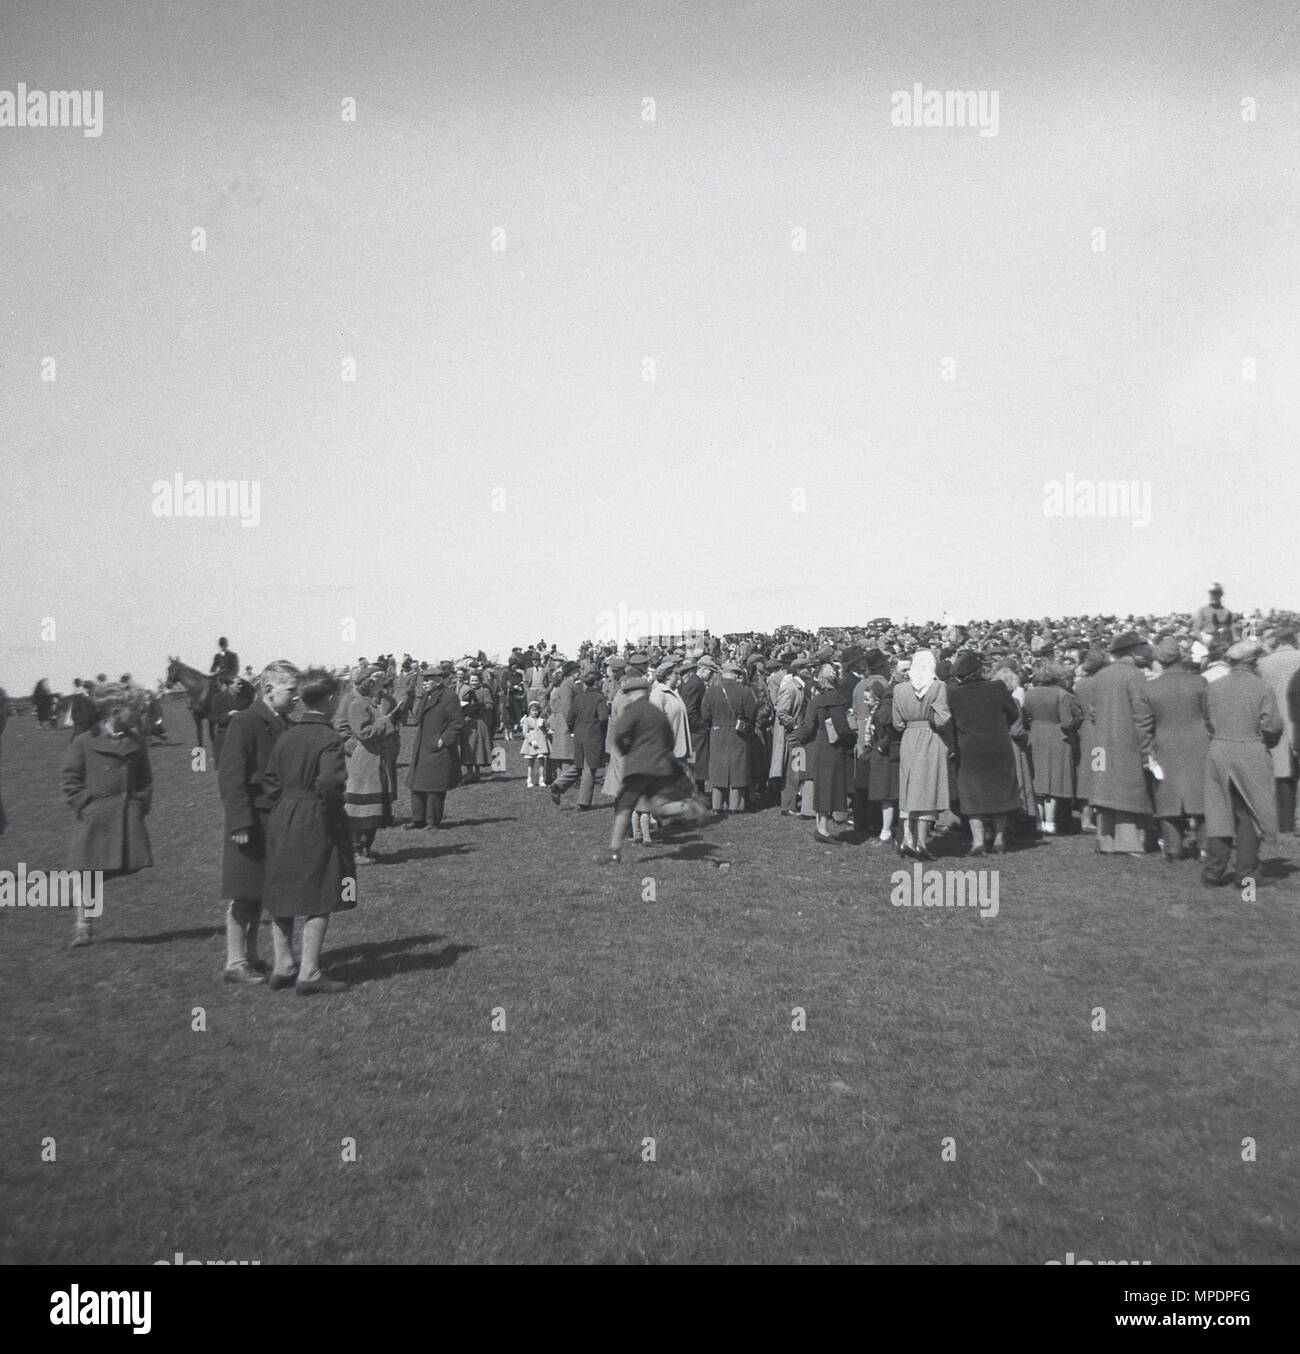 1951, large crowds of spectators attending the Bramham horse trials, at Bramham Park, Wetherby, Yorkshire, England, UK, a major outdoor equestrian event. Stock Photo